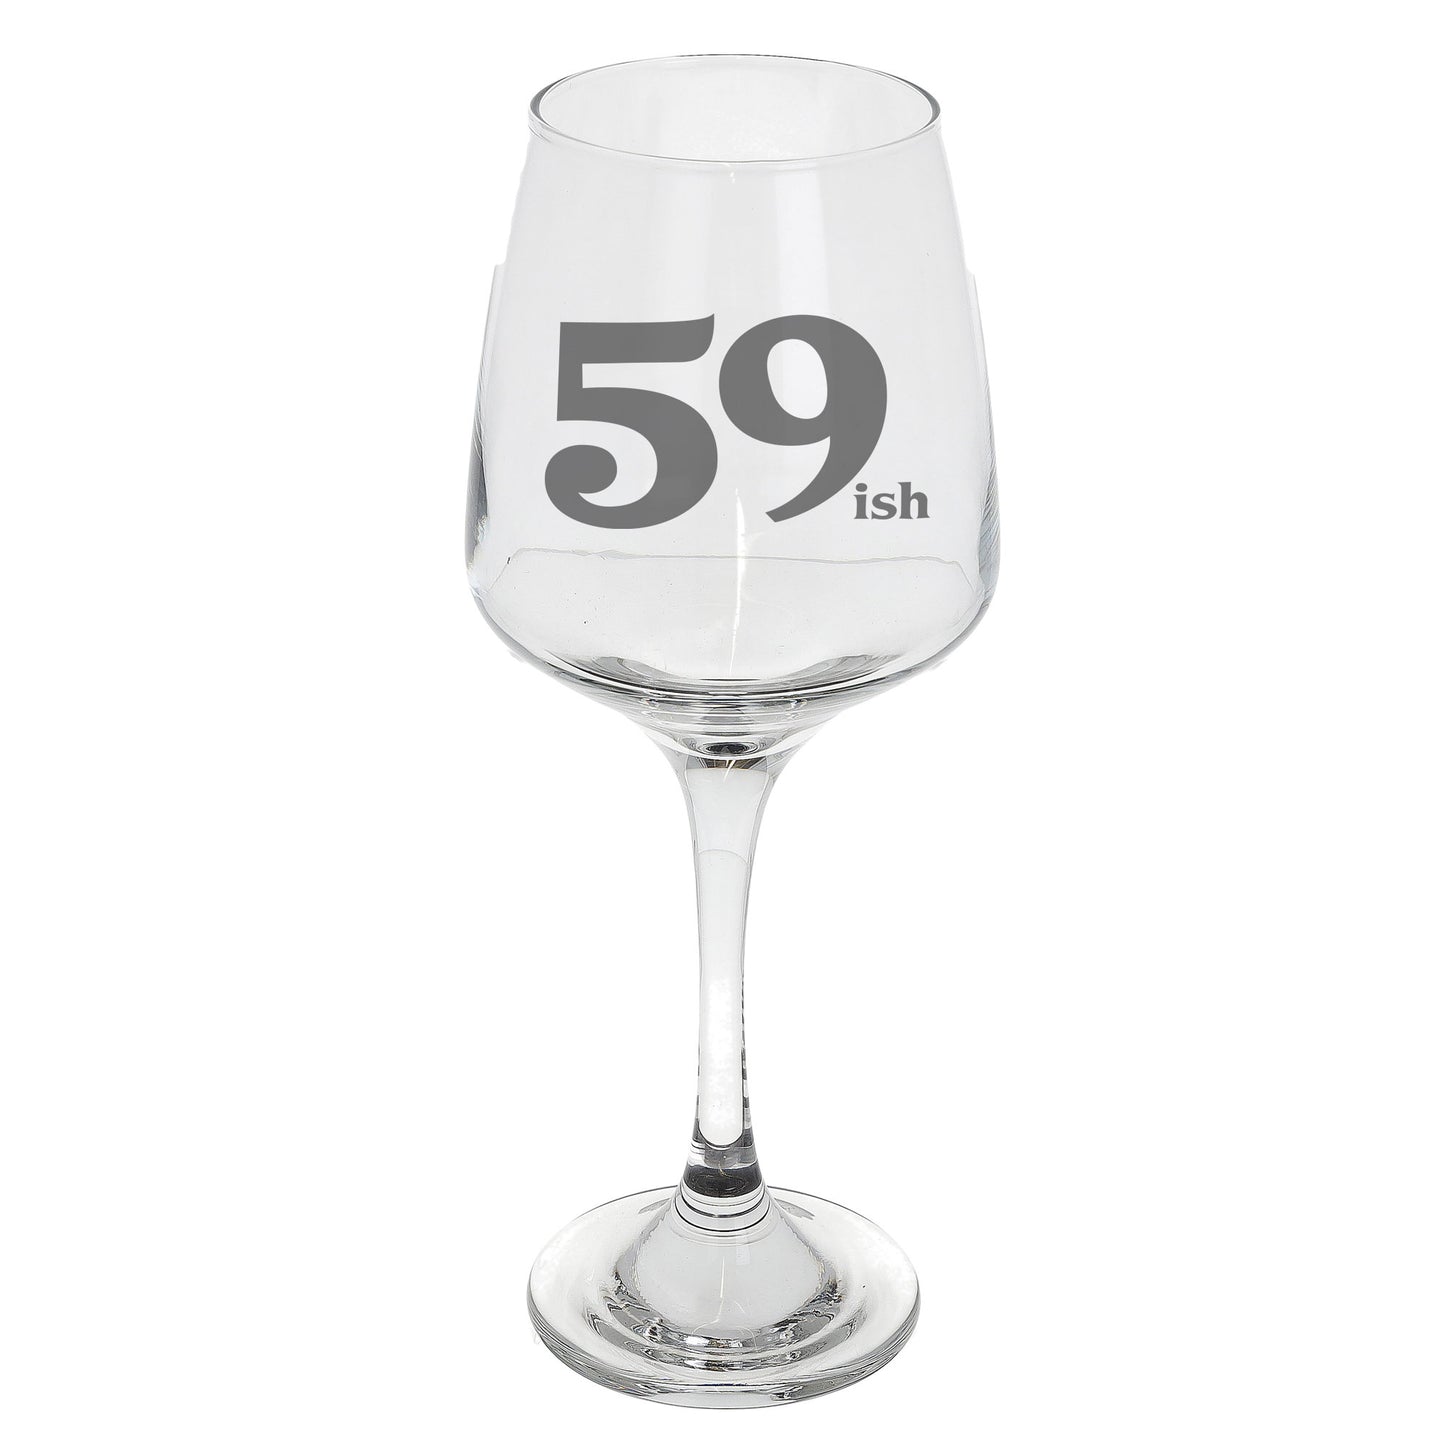 59ish Wine Glass and/or Coaster Set  - Always Looking Good - Wine Glass On Its Own  